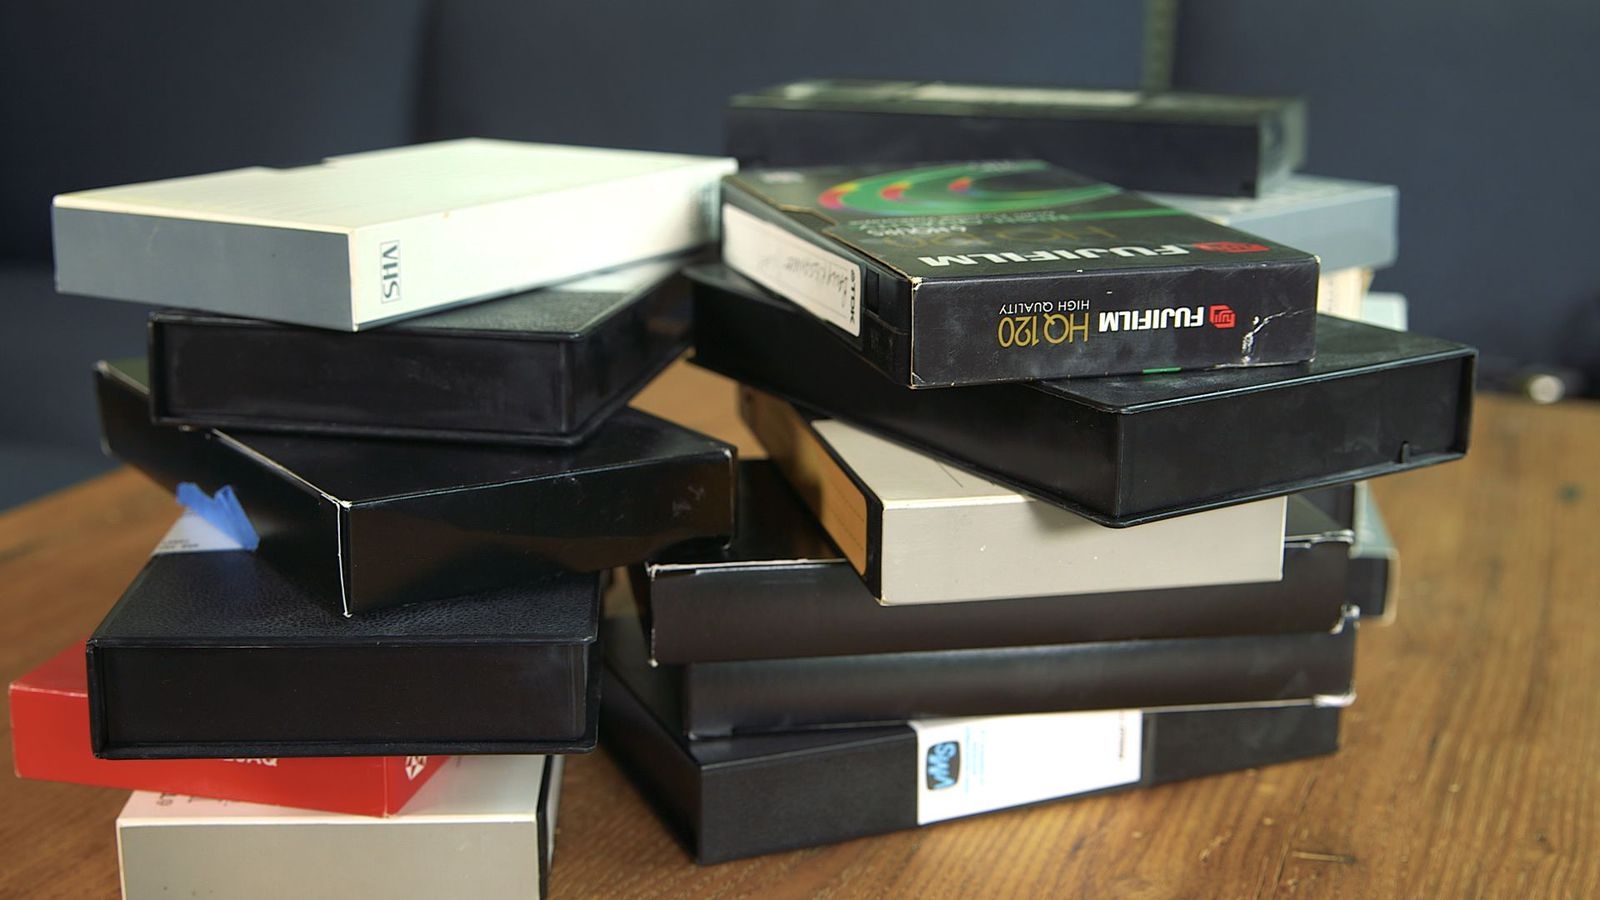 Two stacks of vhs video tapes in cases.